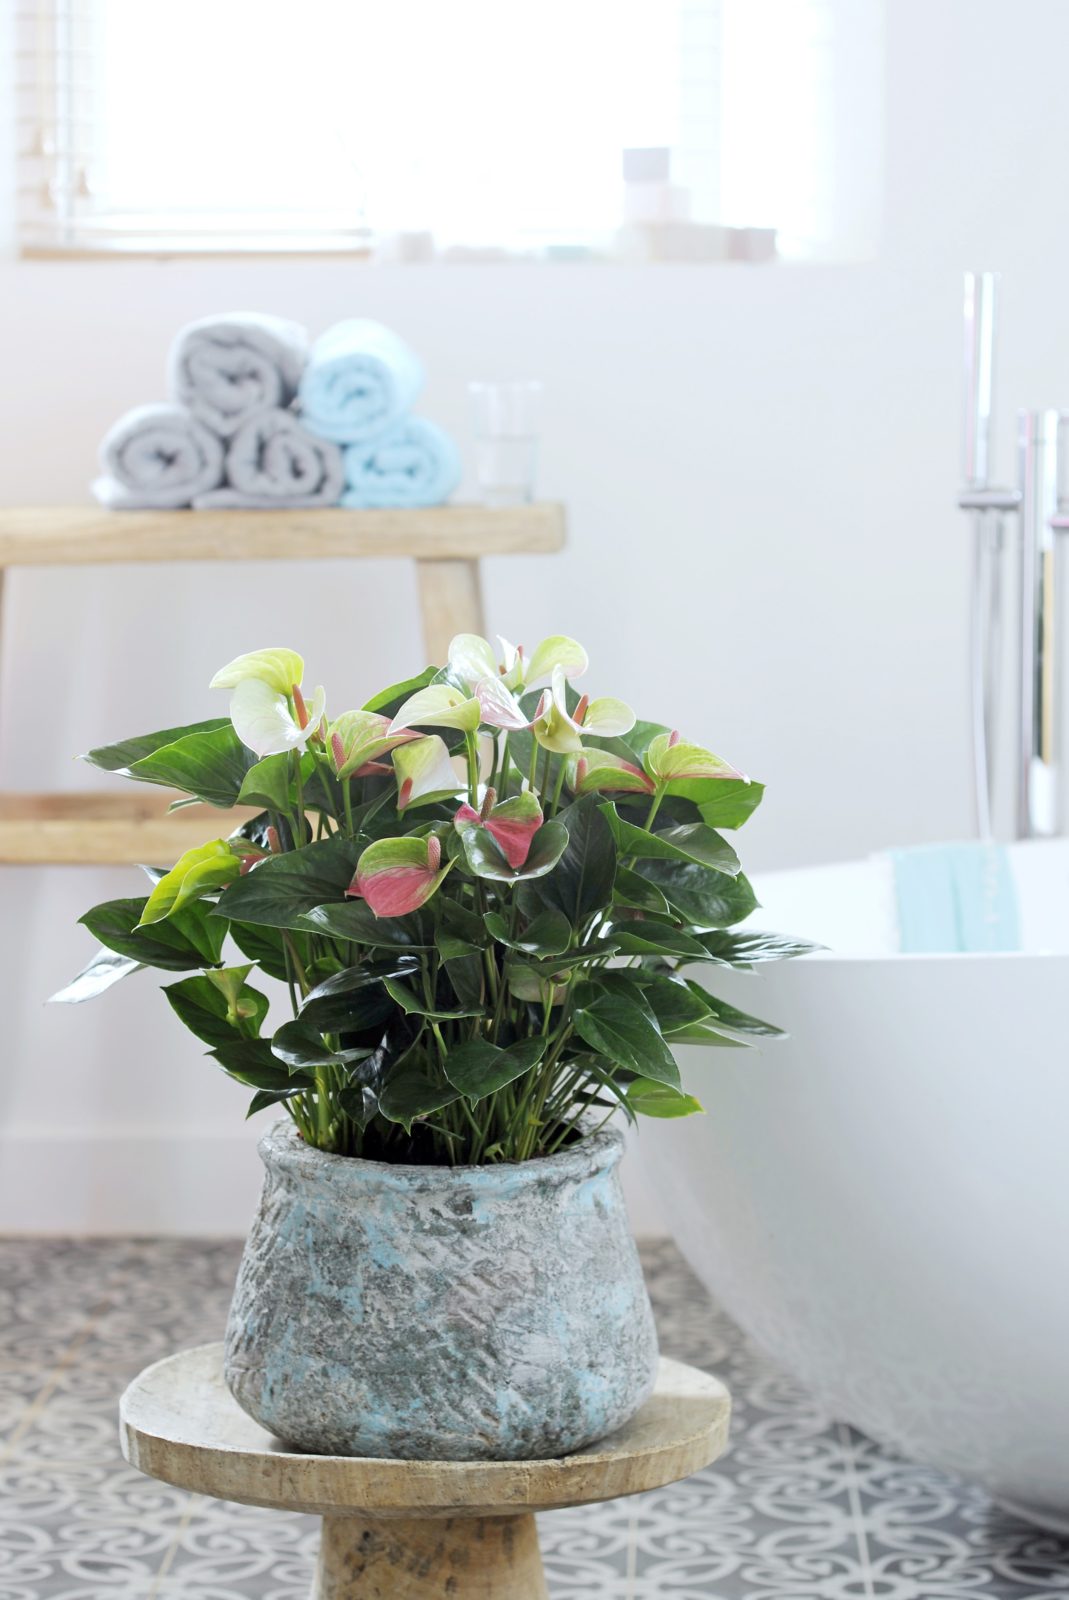 Bring spring into the house with Anthurium plants